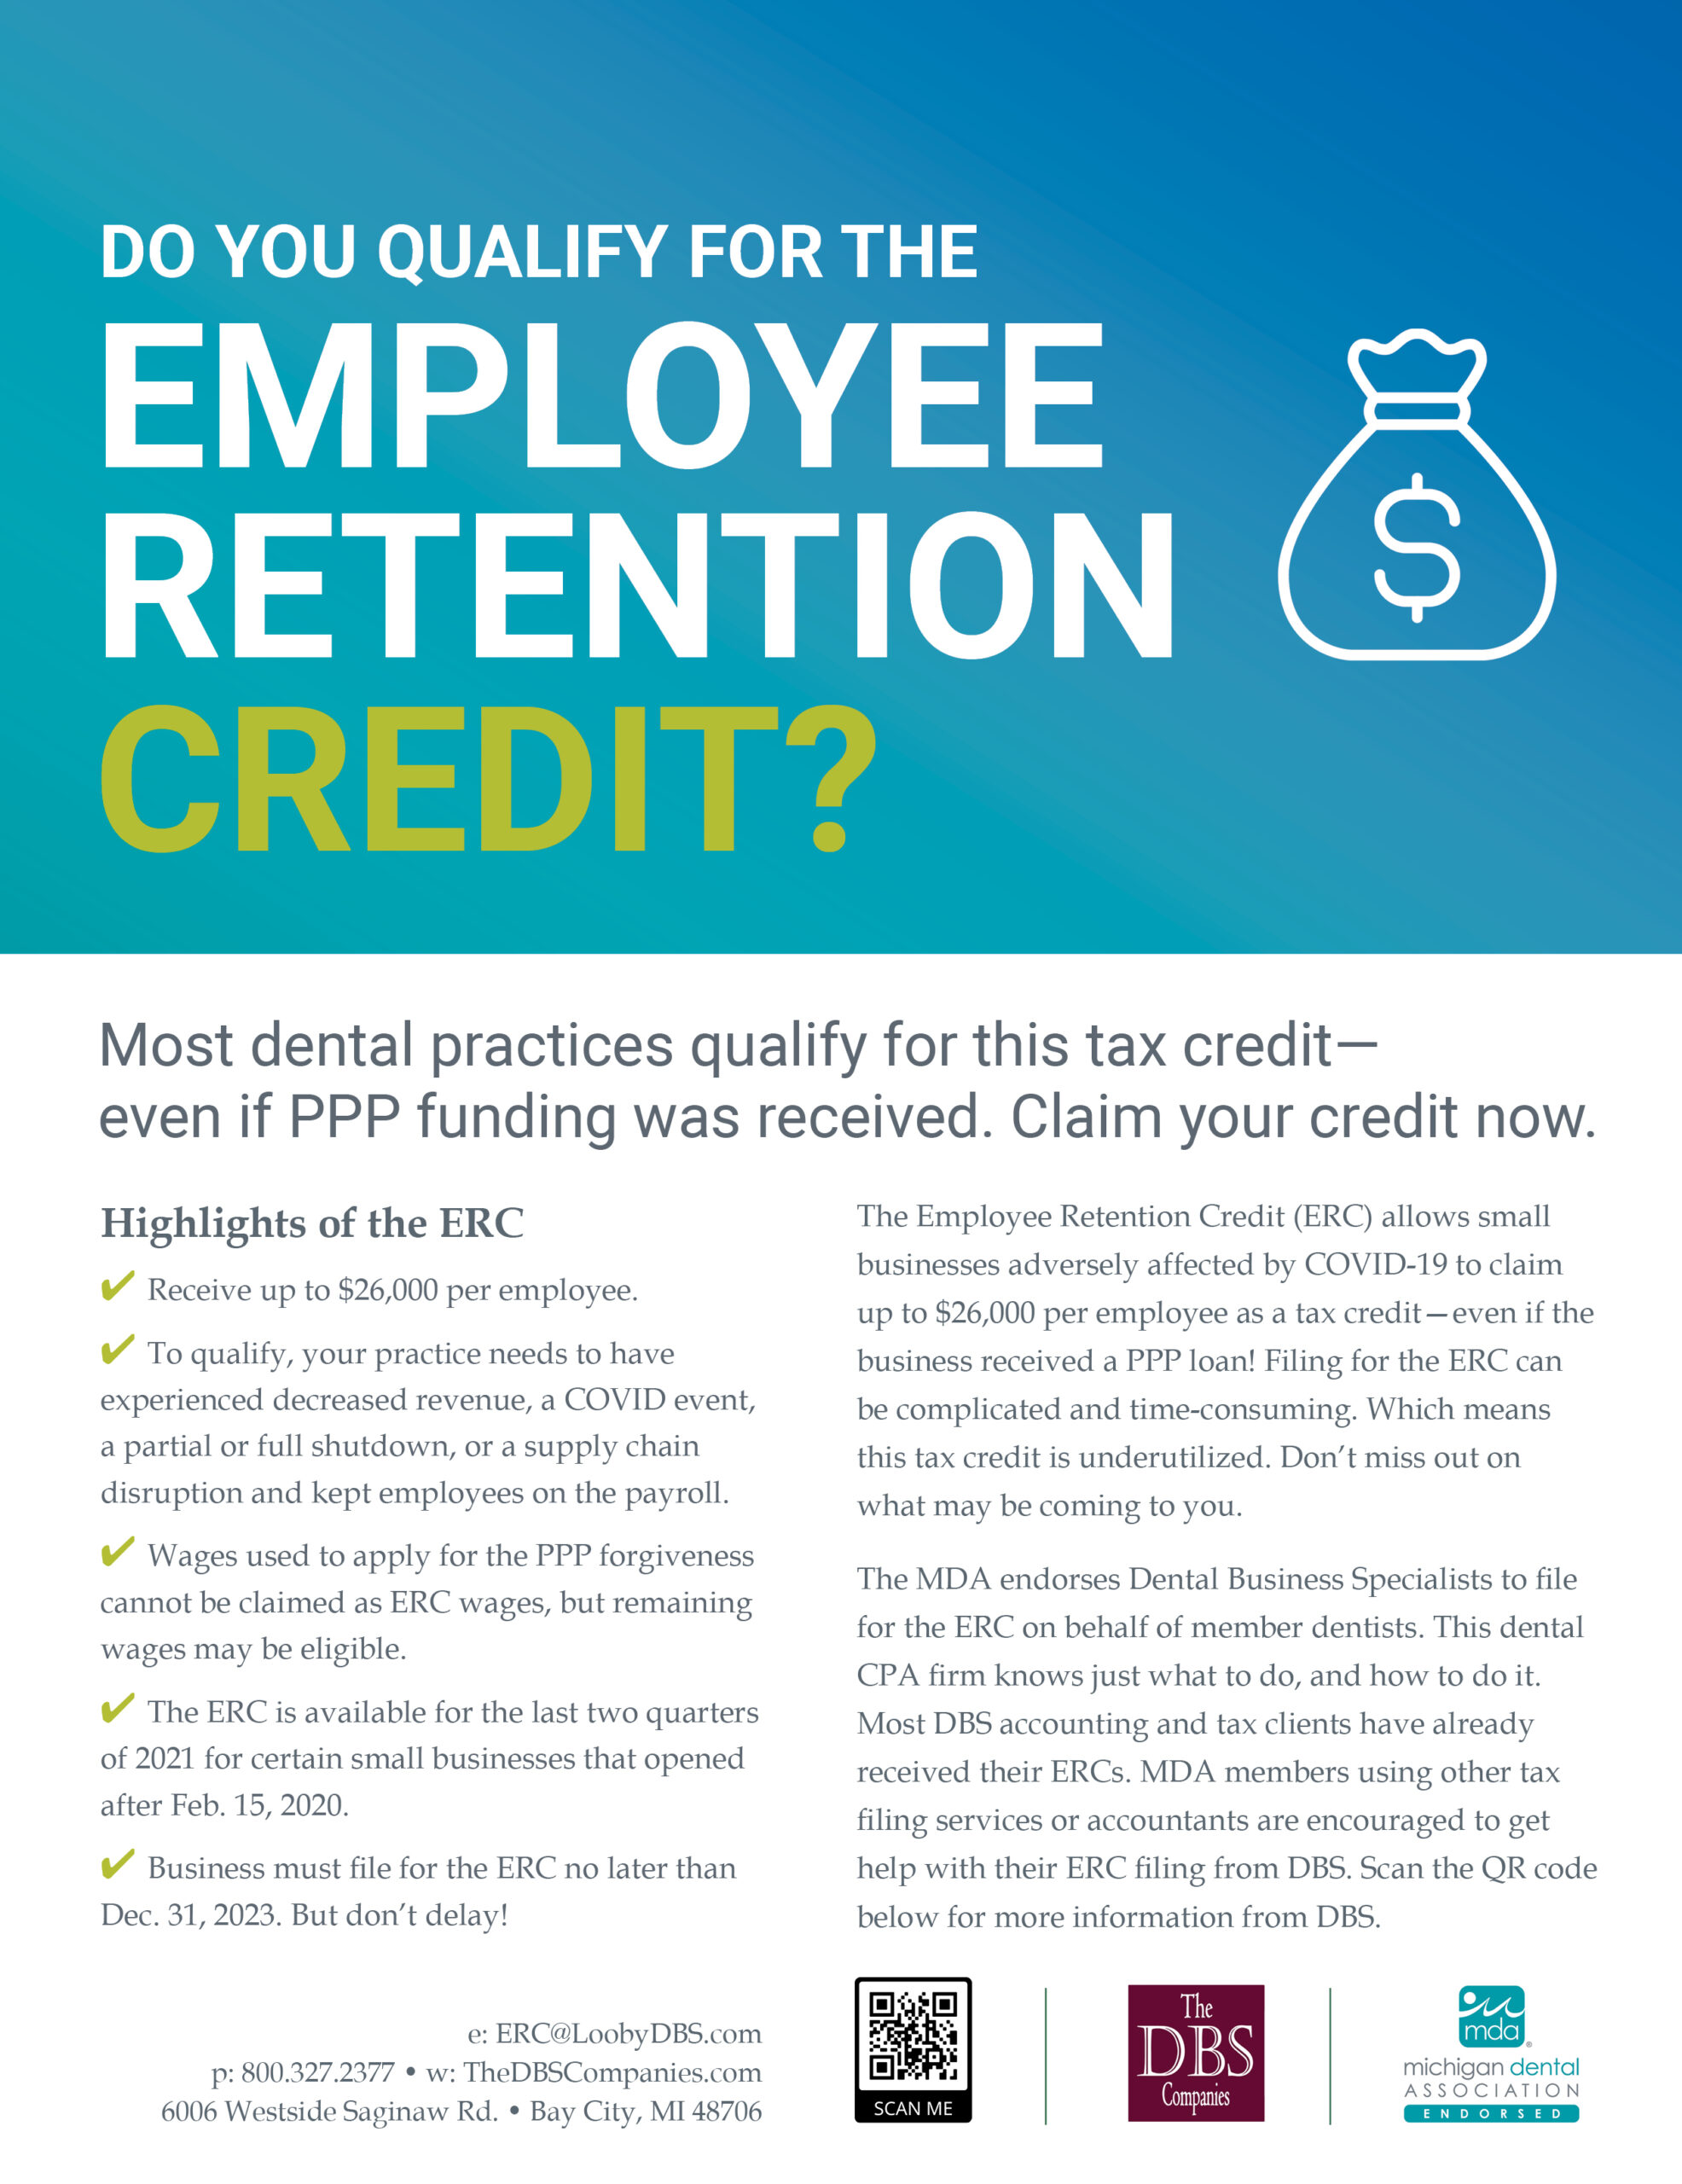 do-you-have-to-pay-back-the-employee-retention-tax-credit-leia-aqui